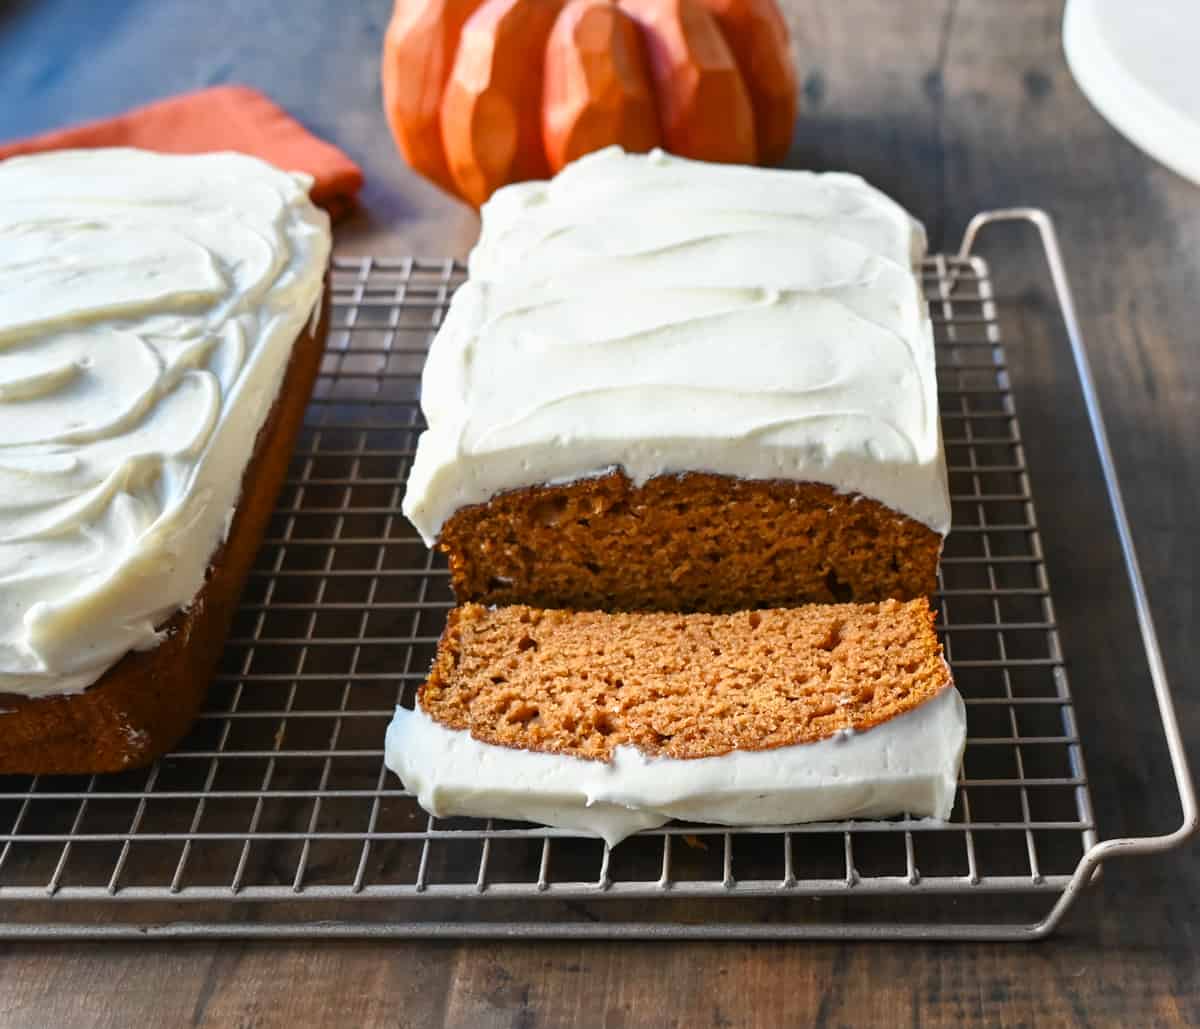 Frosted Pumpkin Loaf with Cream Cheese Frosting. Moist, soft pumpkin spice loaf topped with homemade cream cheese frosting. This frosted pumpkin bread is the perfect Fall treat.